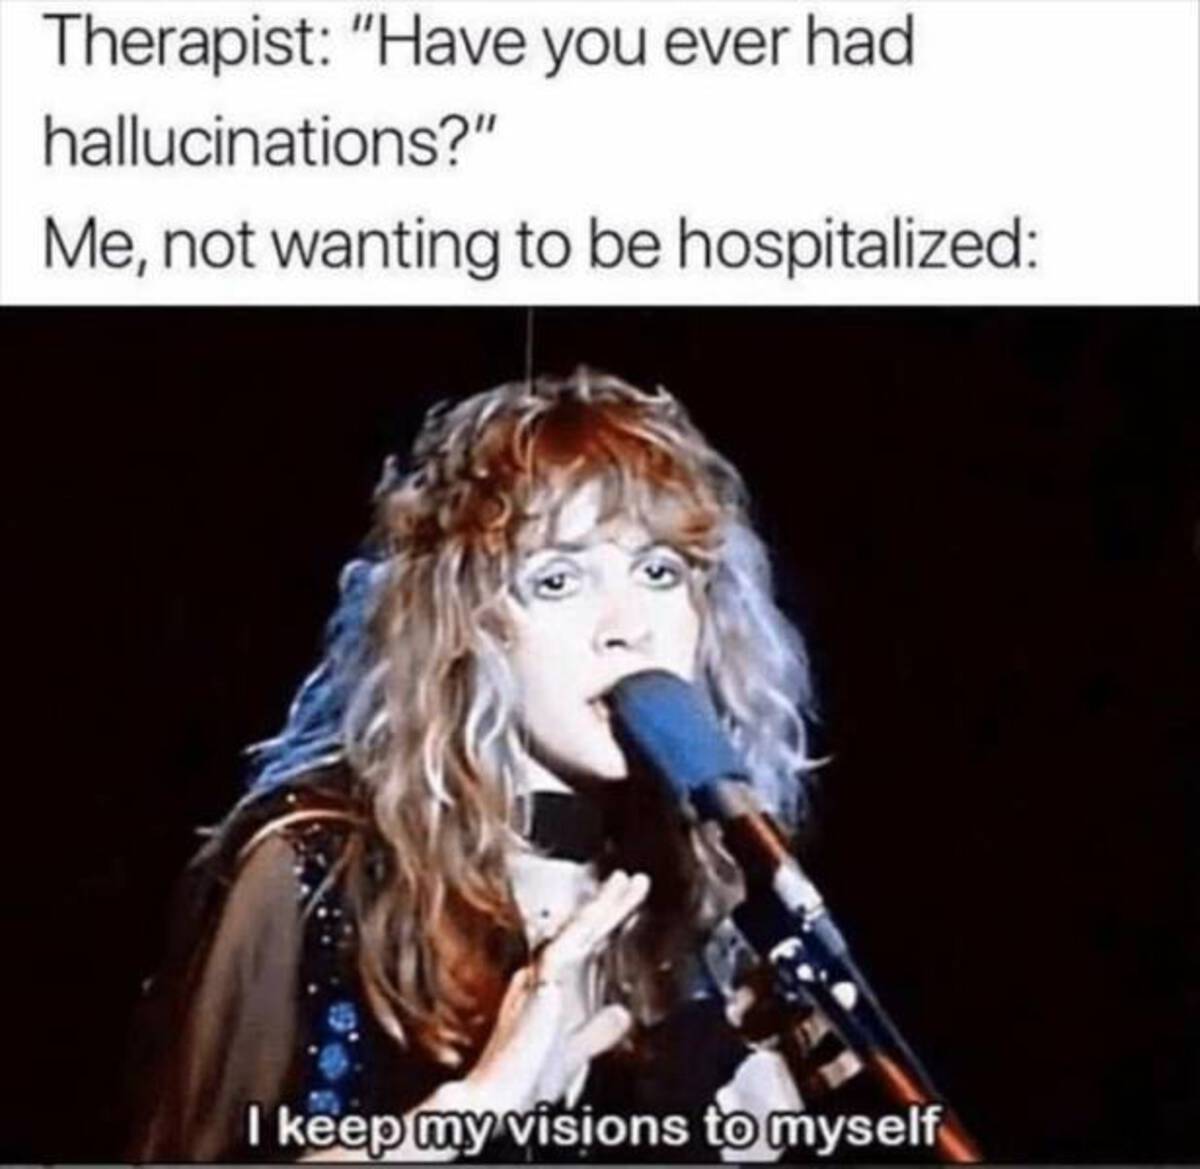 stevie nicks i keep my visions to myself - Therapist "Have you ever had hallucinations?" Me, not wanting to be hospitalized I keep my visions to myself